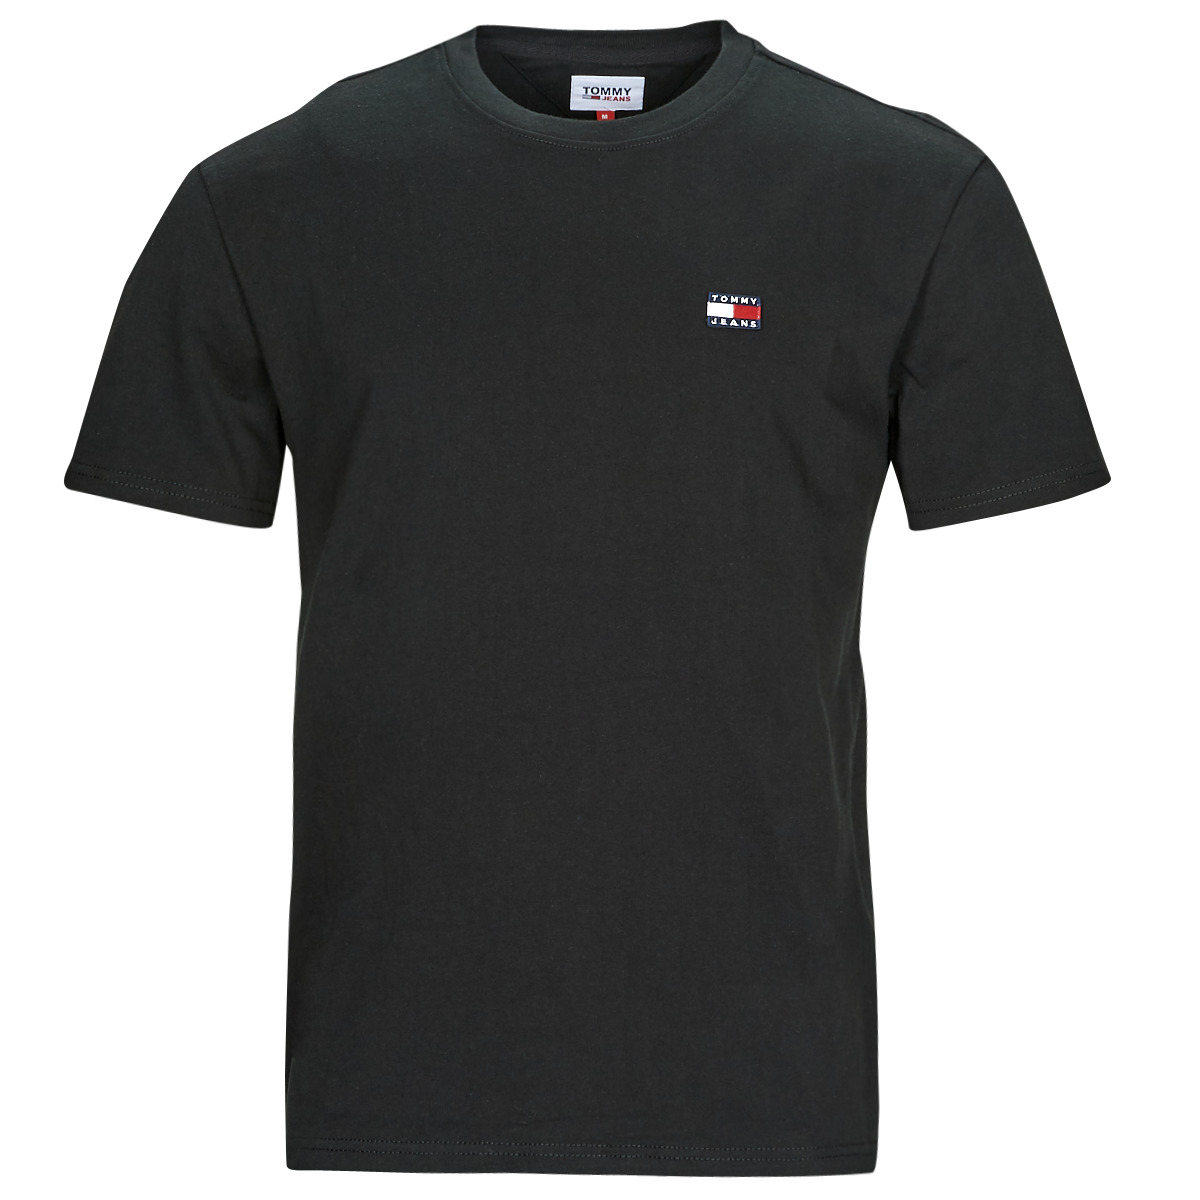 Tommy Jeans TJM CLSC TOMMY short-sleeved Black | NET Spartoo BADGE ! delivery - TEE Free XS Men - t-shirts Clothing